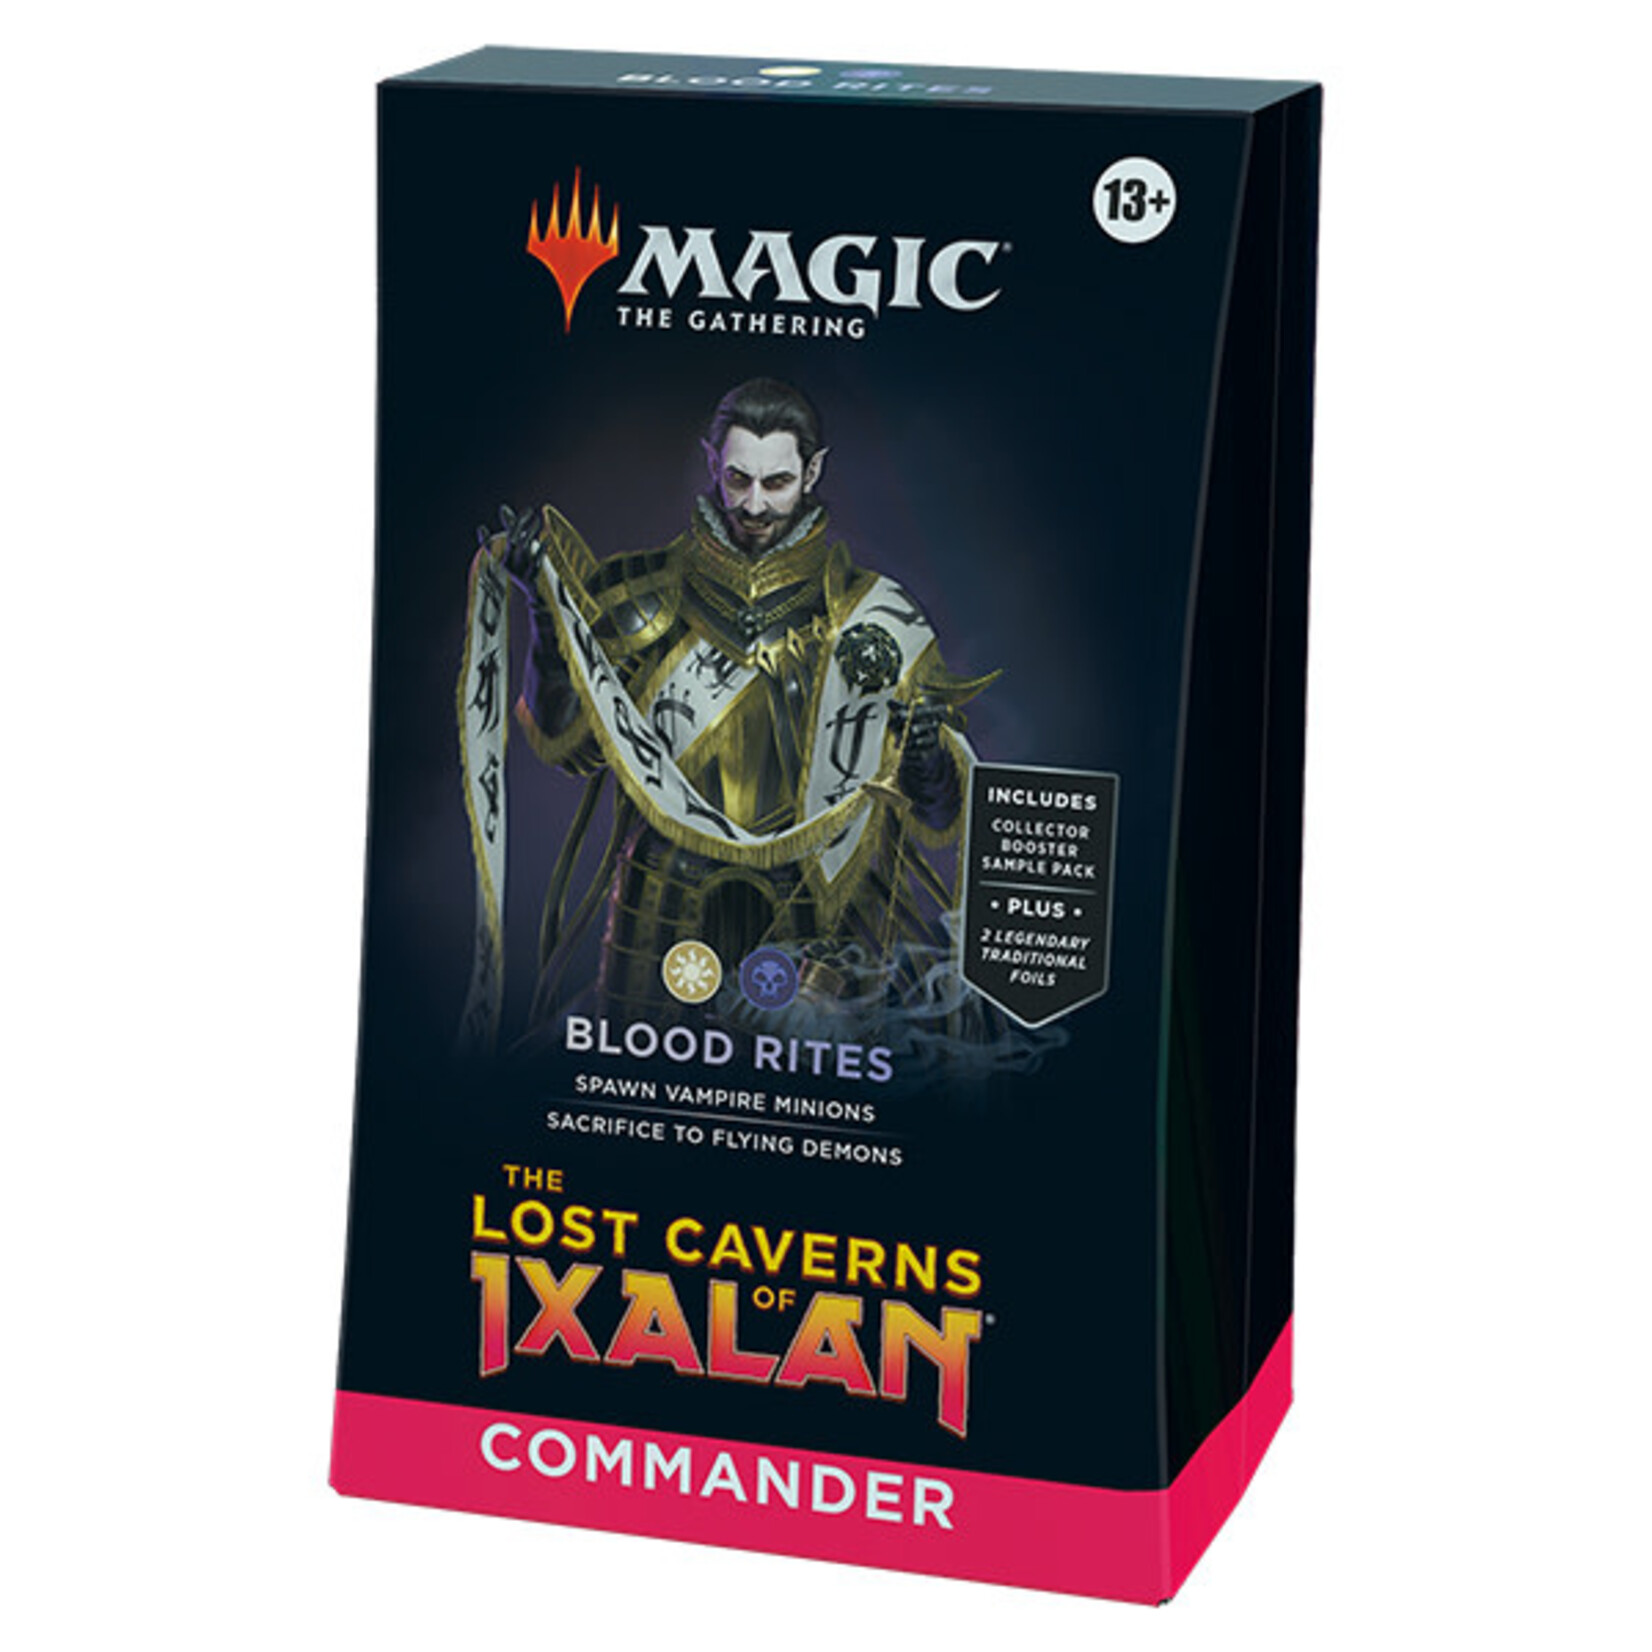 Wizards of the Coast Magic - Lost Caverns of Ixalan Commander Deck - Blood Rites (BW)